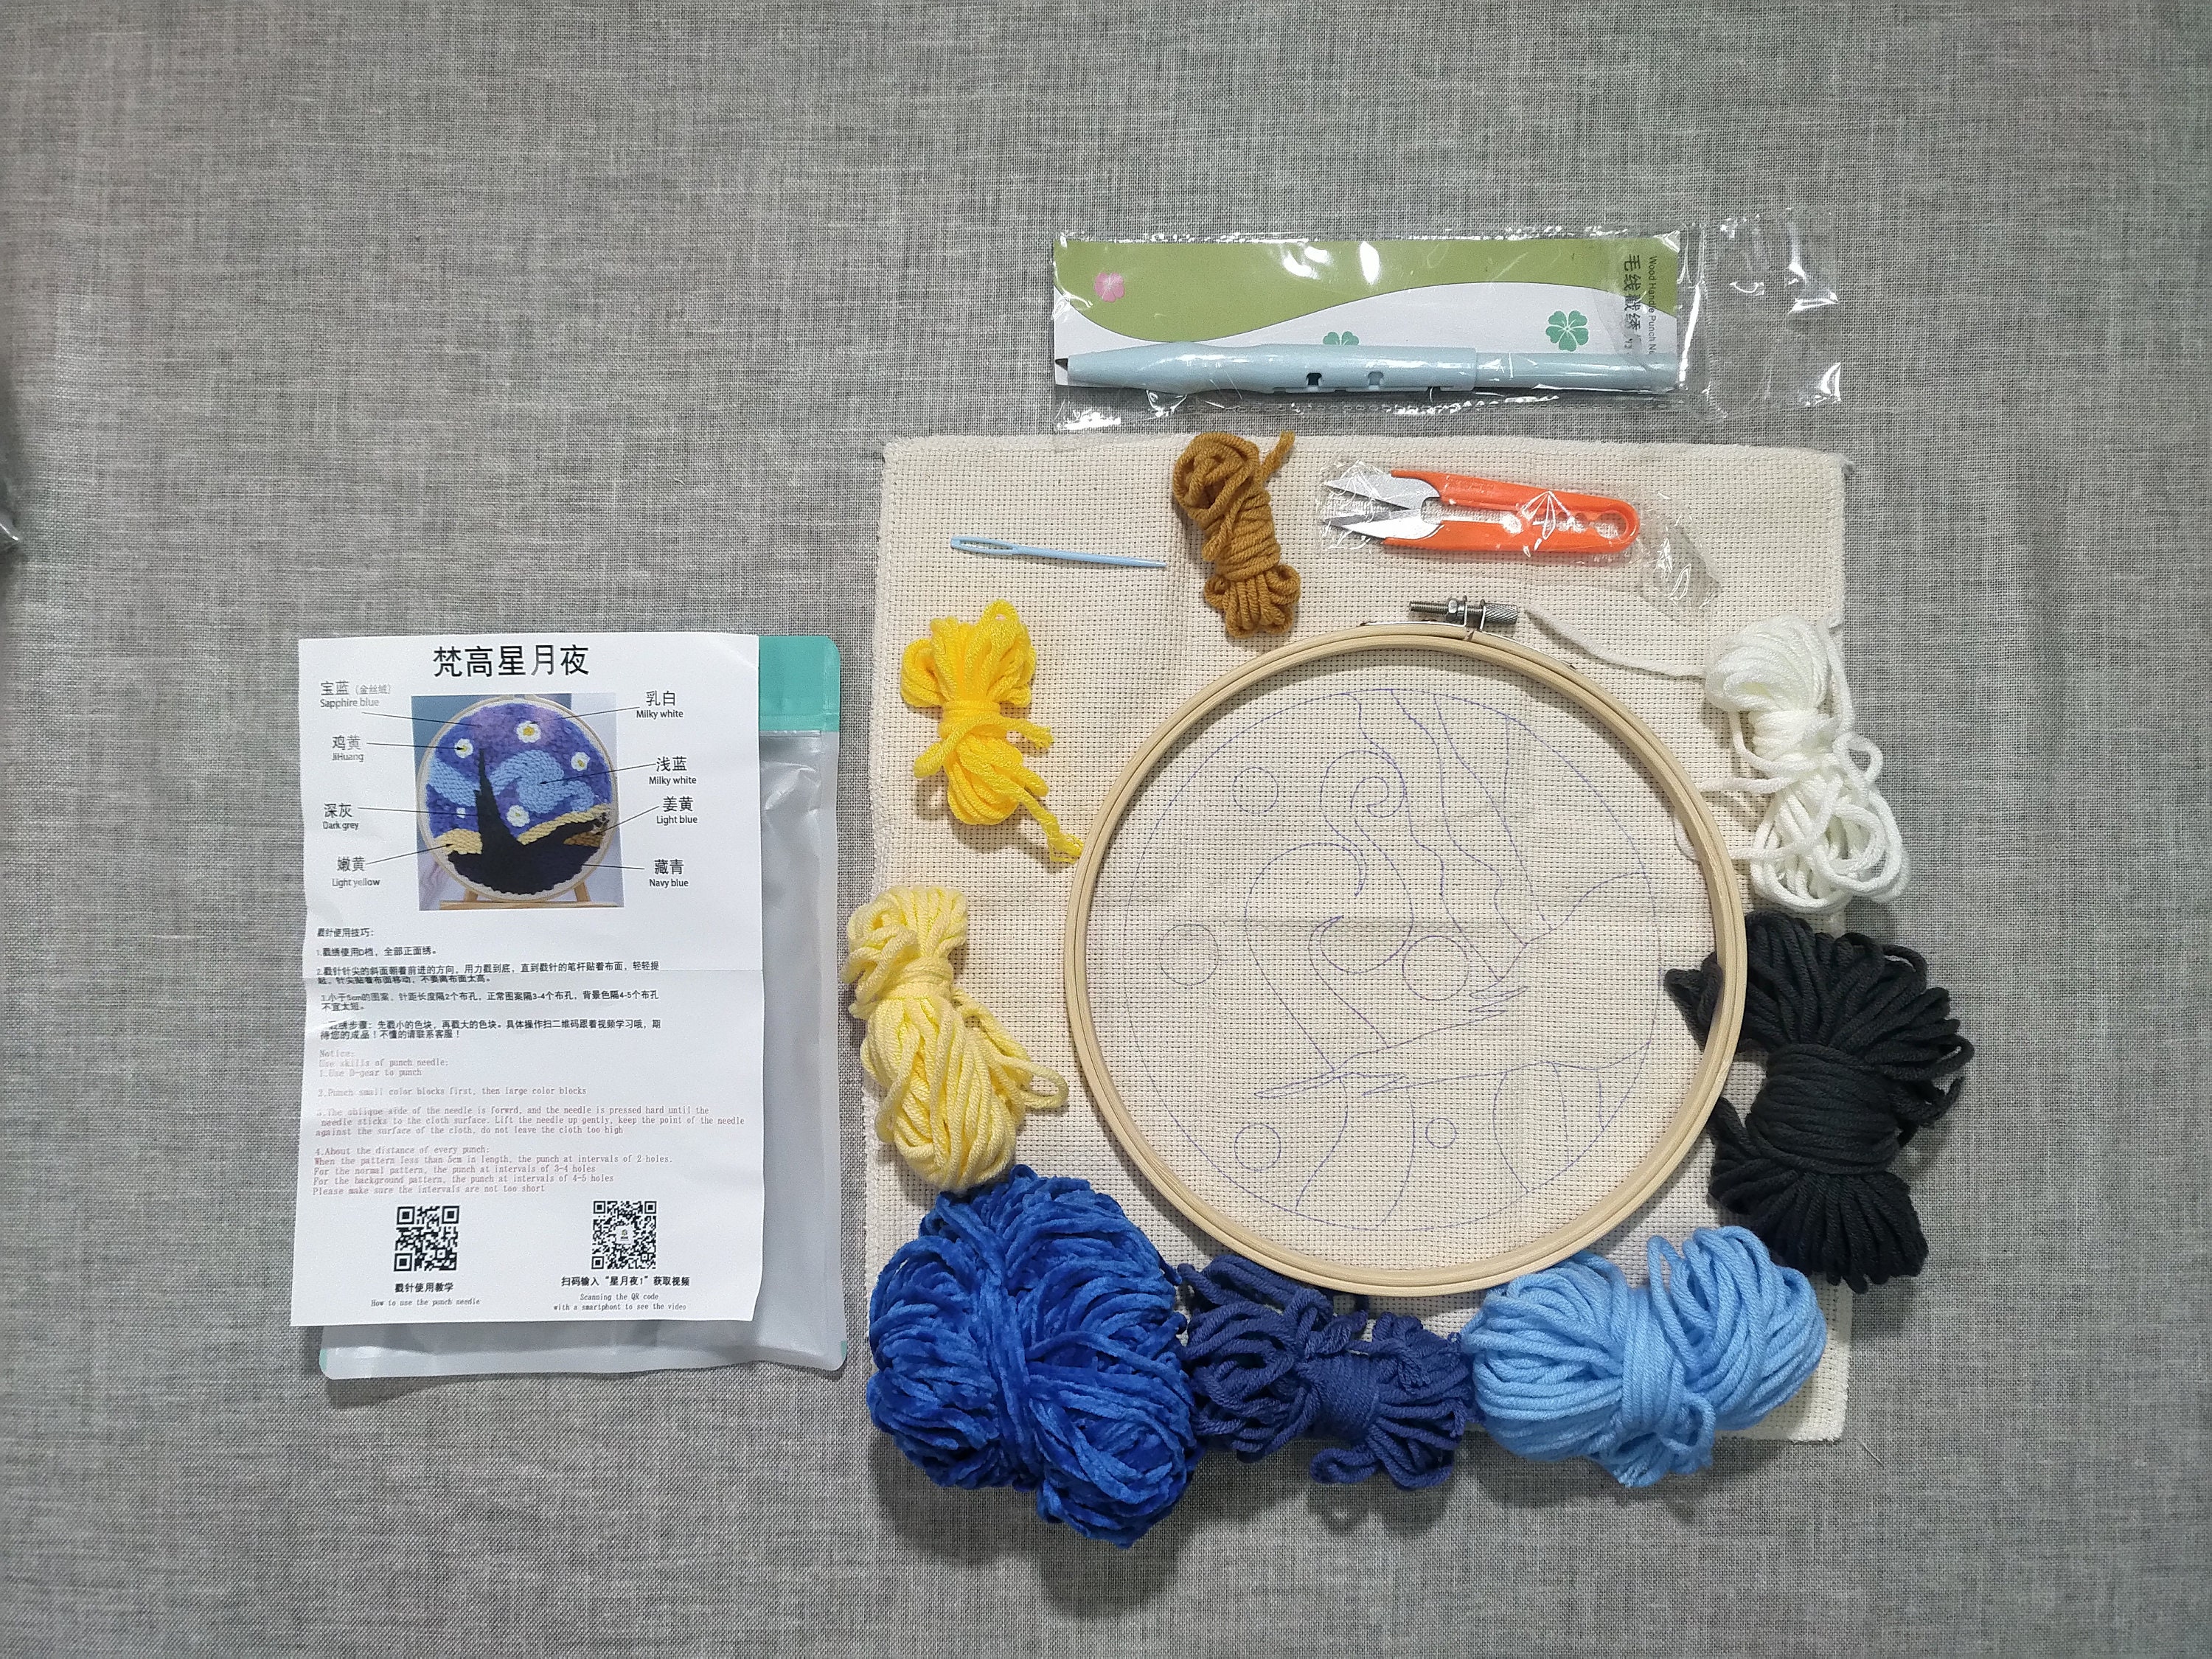 Needle Woman Complete Punch Embroidery Kit For Beginner With Magic Yarn  Wool Tufting Rug Hooking DIY Craft Set From Deng10, $4.83